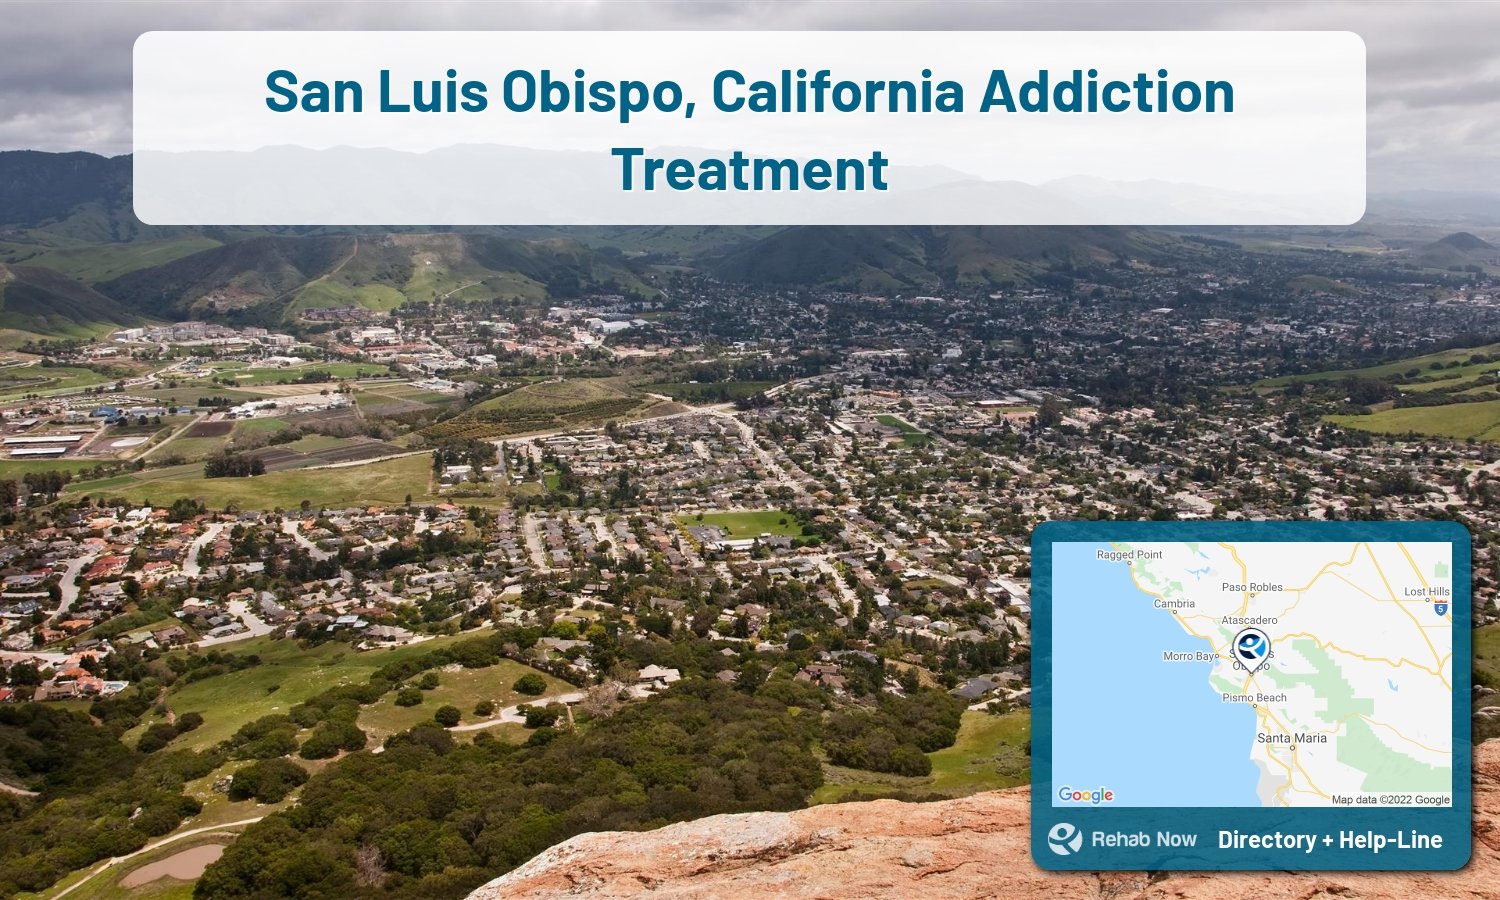 Need treatment nearby in San Luis Obispo, California? Choose a drug/alcohol rehab center from our list, or call our hotline now for free help.